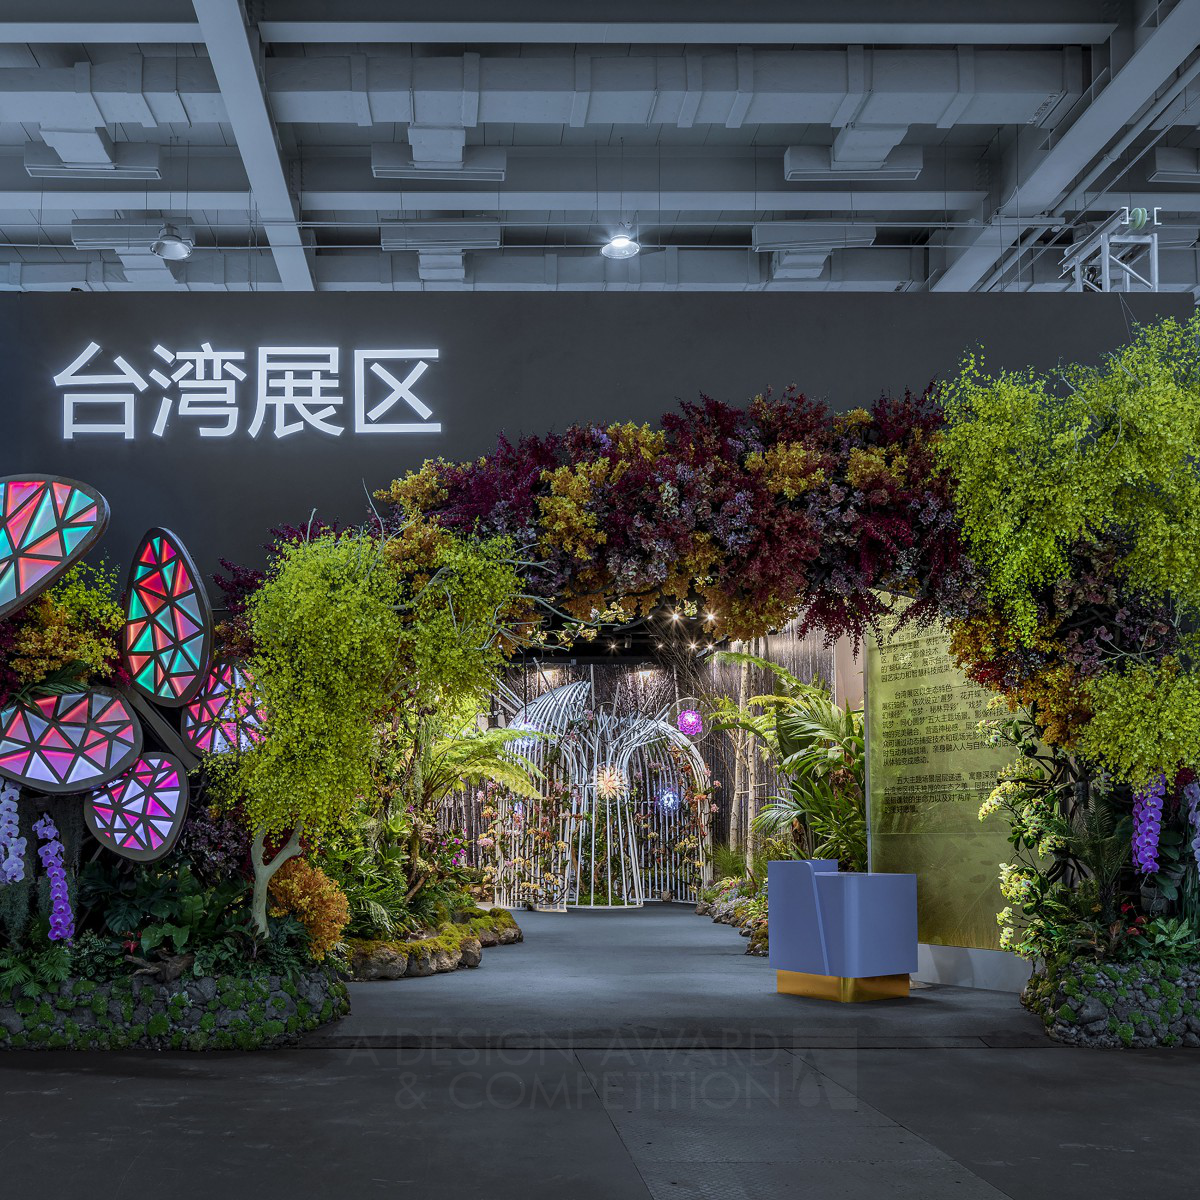 The 10th china Flower Expo Exhibition by Alex Chiang